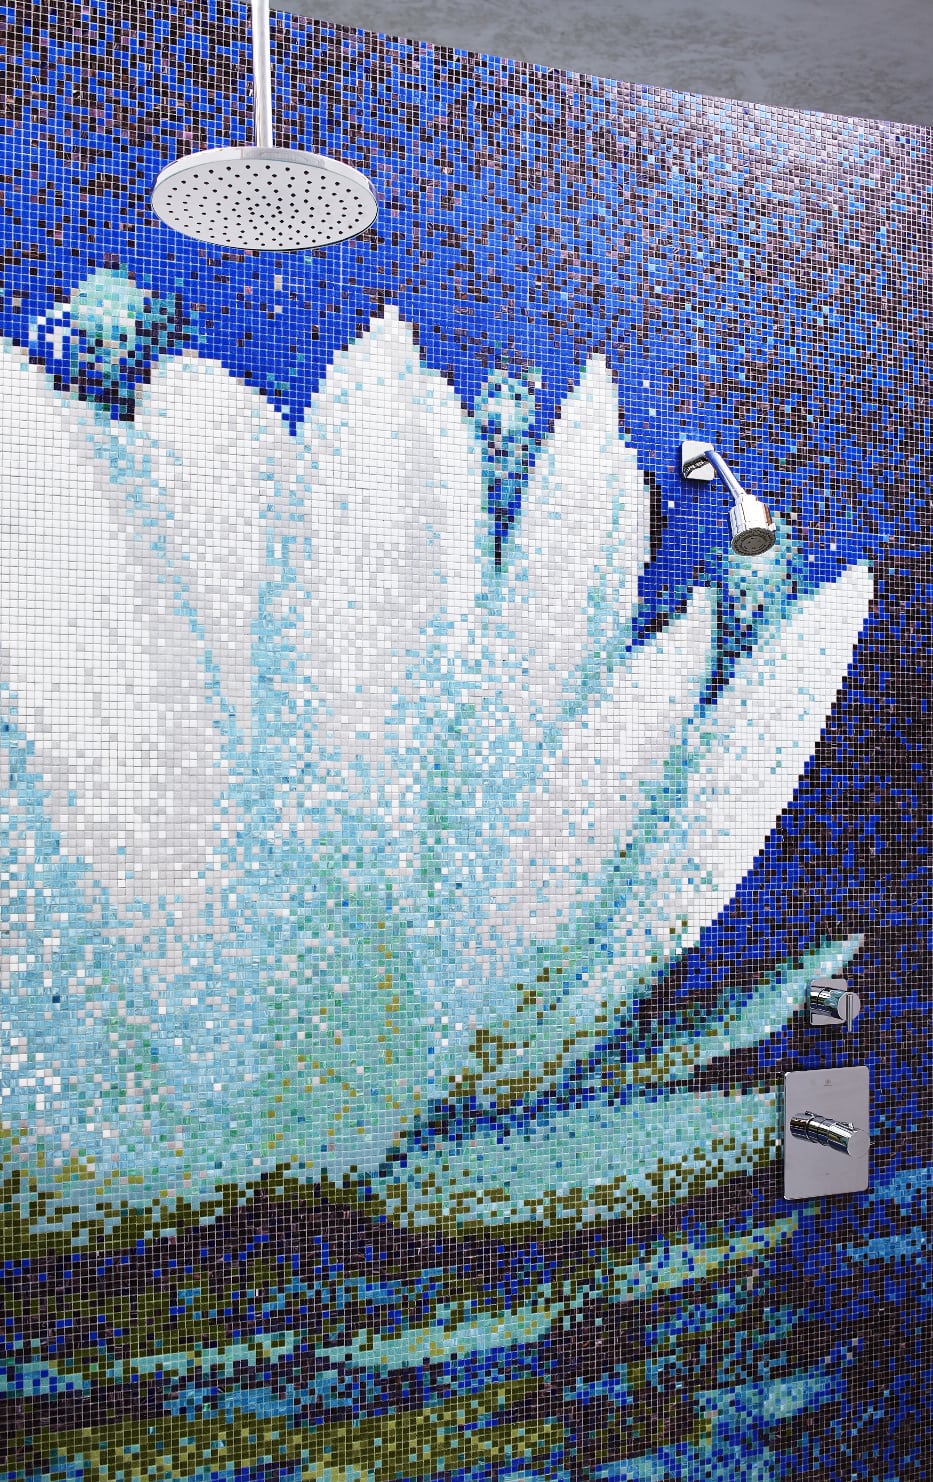 The water lily mosaic in Wilson Kelsey Design's new Monet-inspired bathroom.